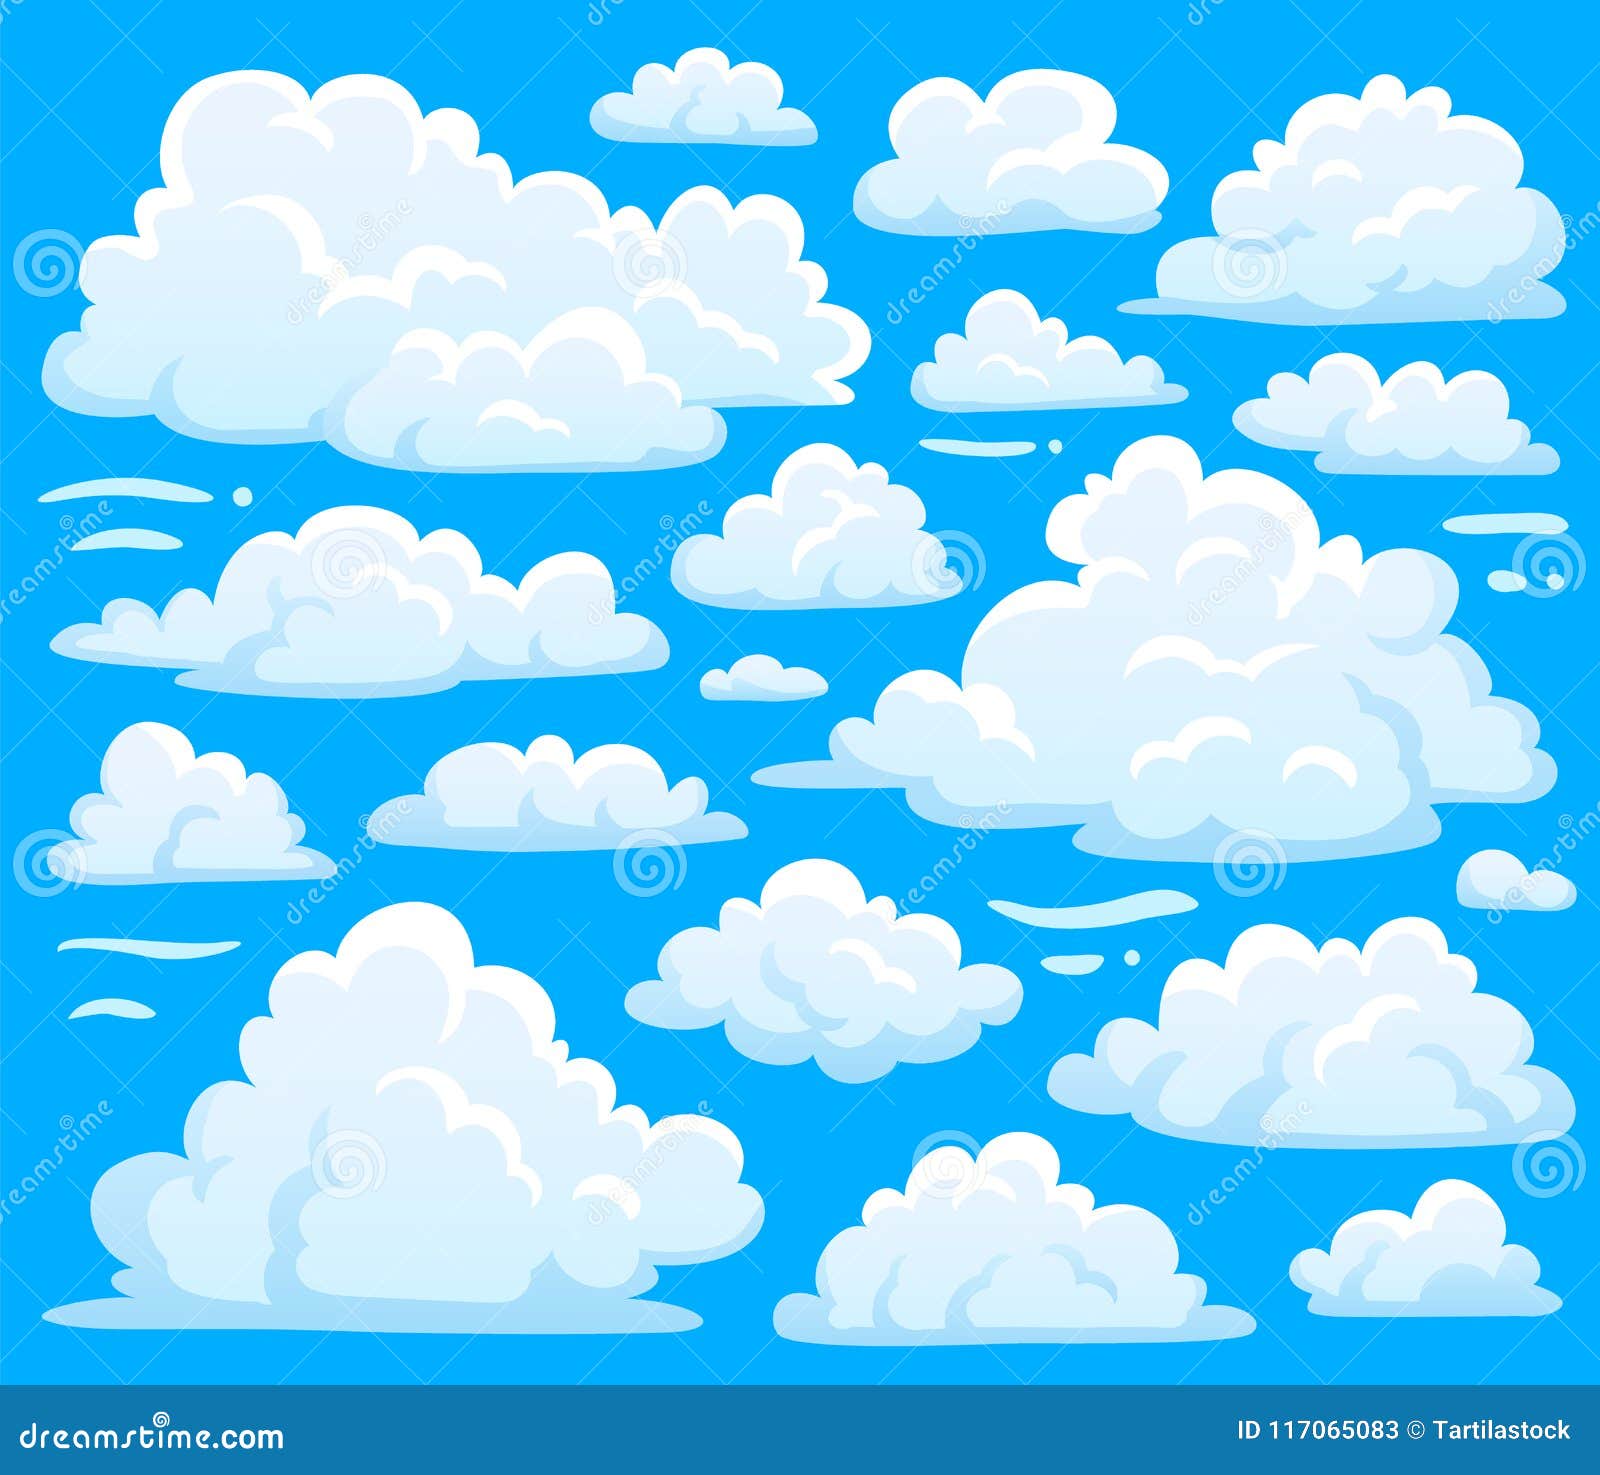 white cloud  for cloudscape background. cartoon clouds s set for cloudy sky climate  